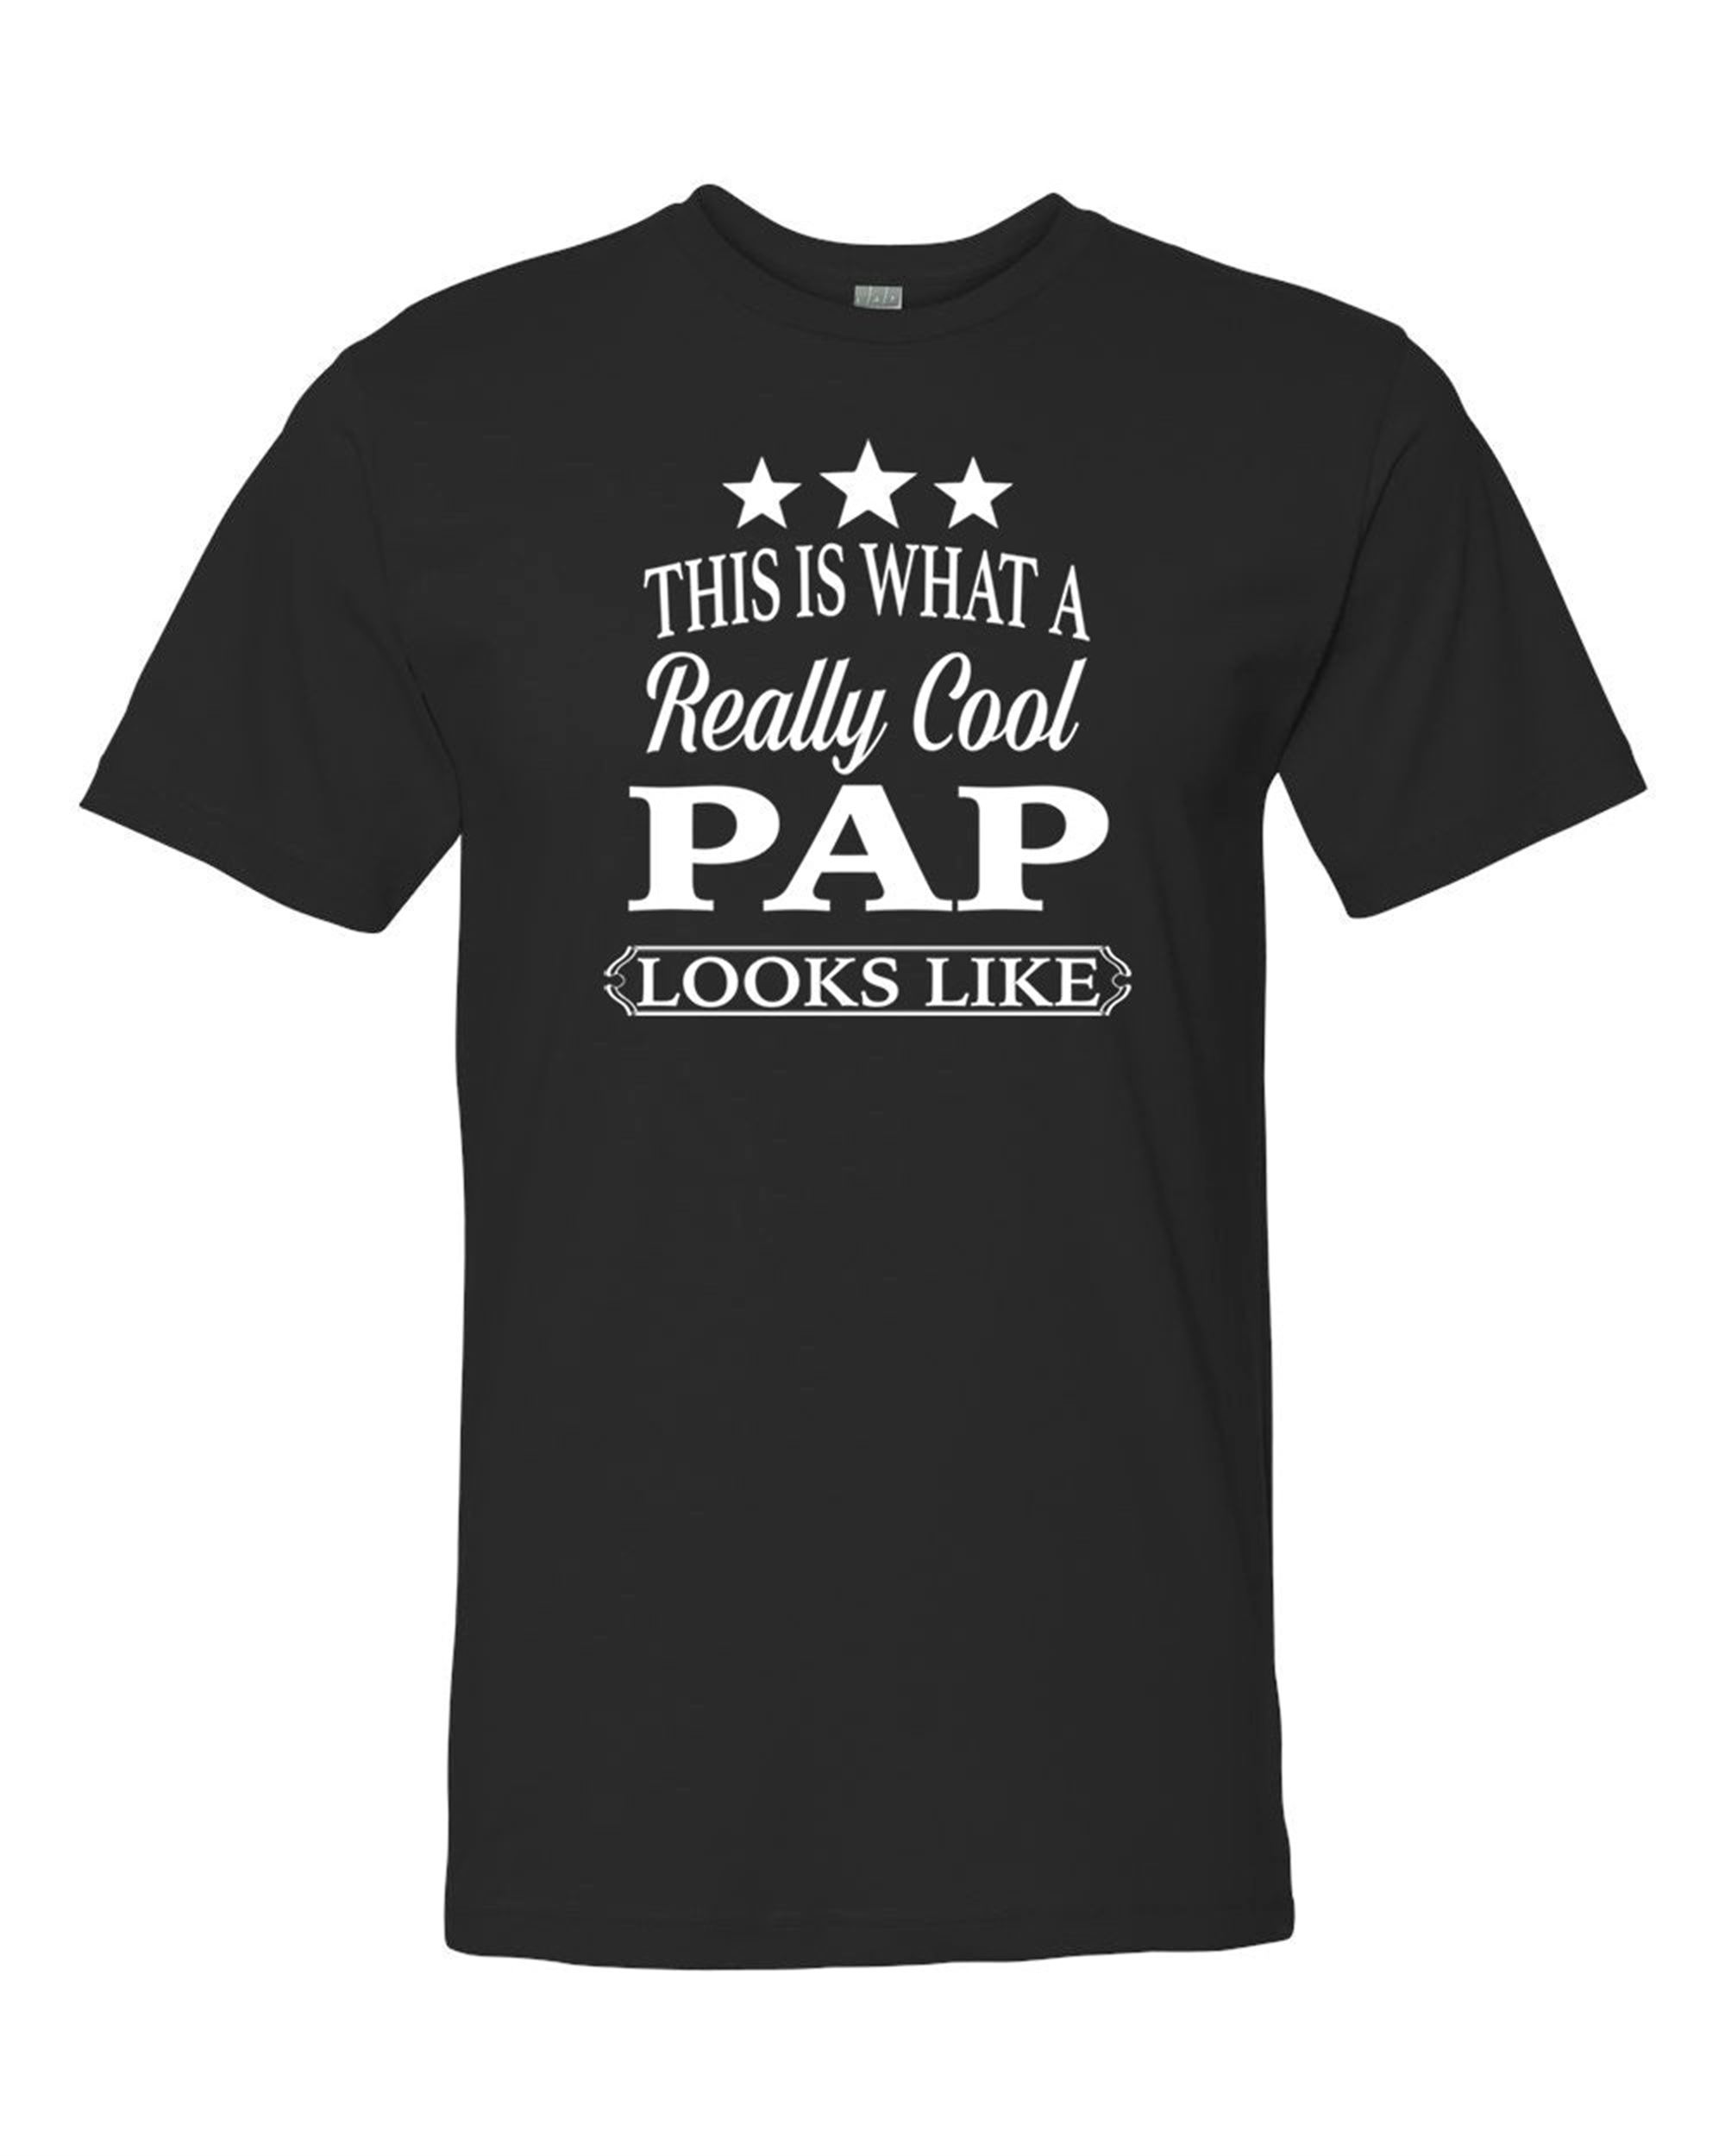 Promotions This Is What A Really Cool Pap Looks Like - Unisex Shirt - Pap Shirt - Pap Gift 